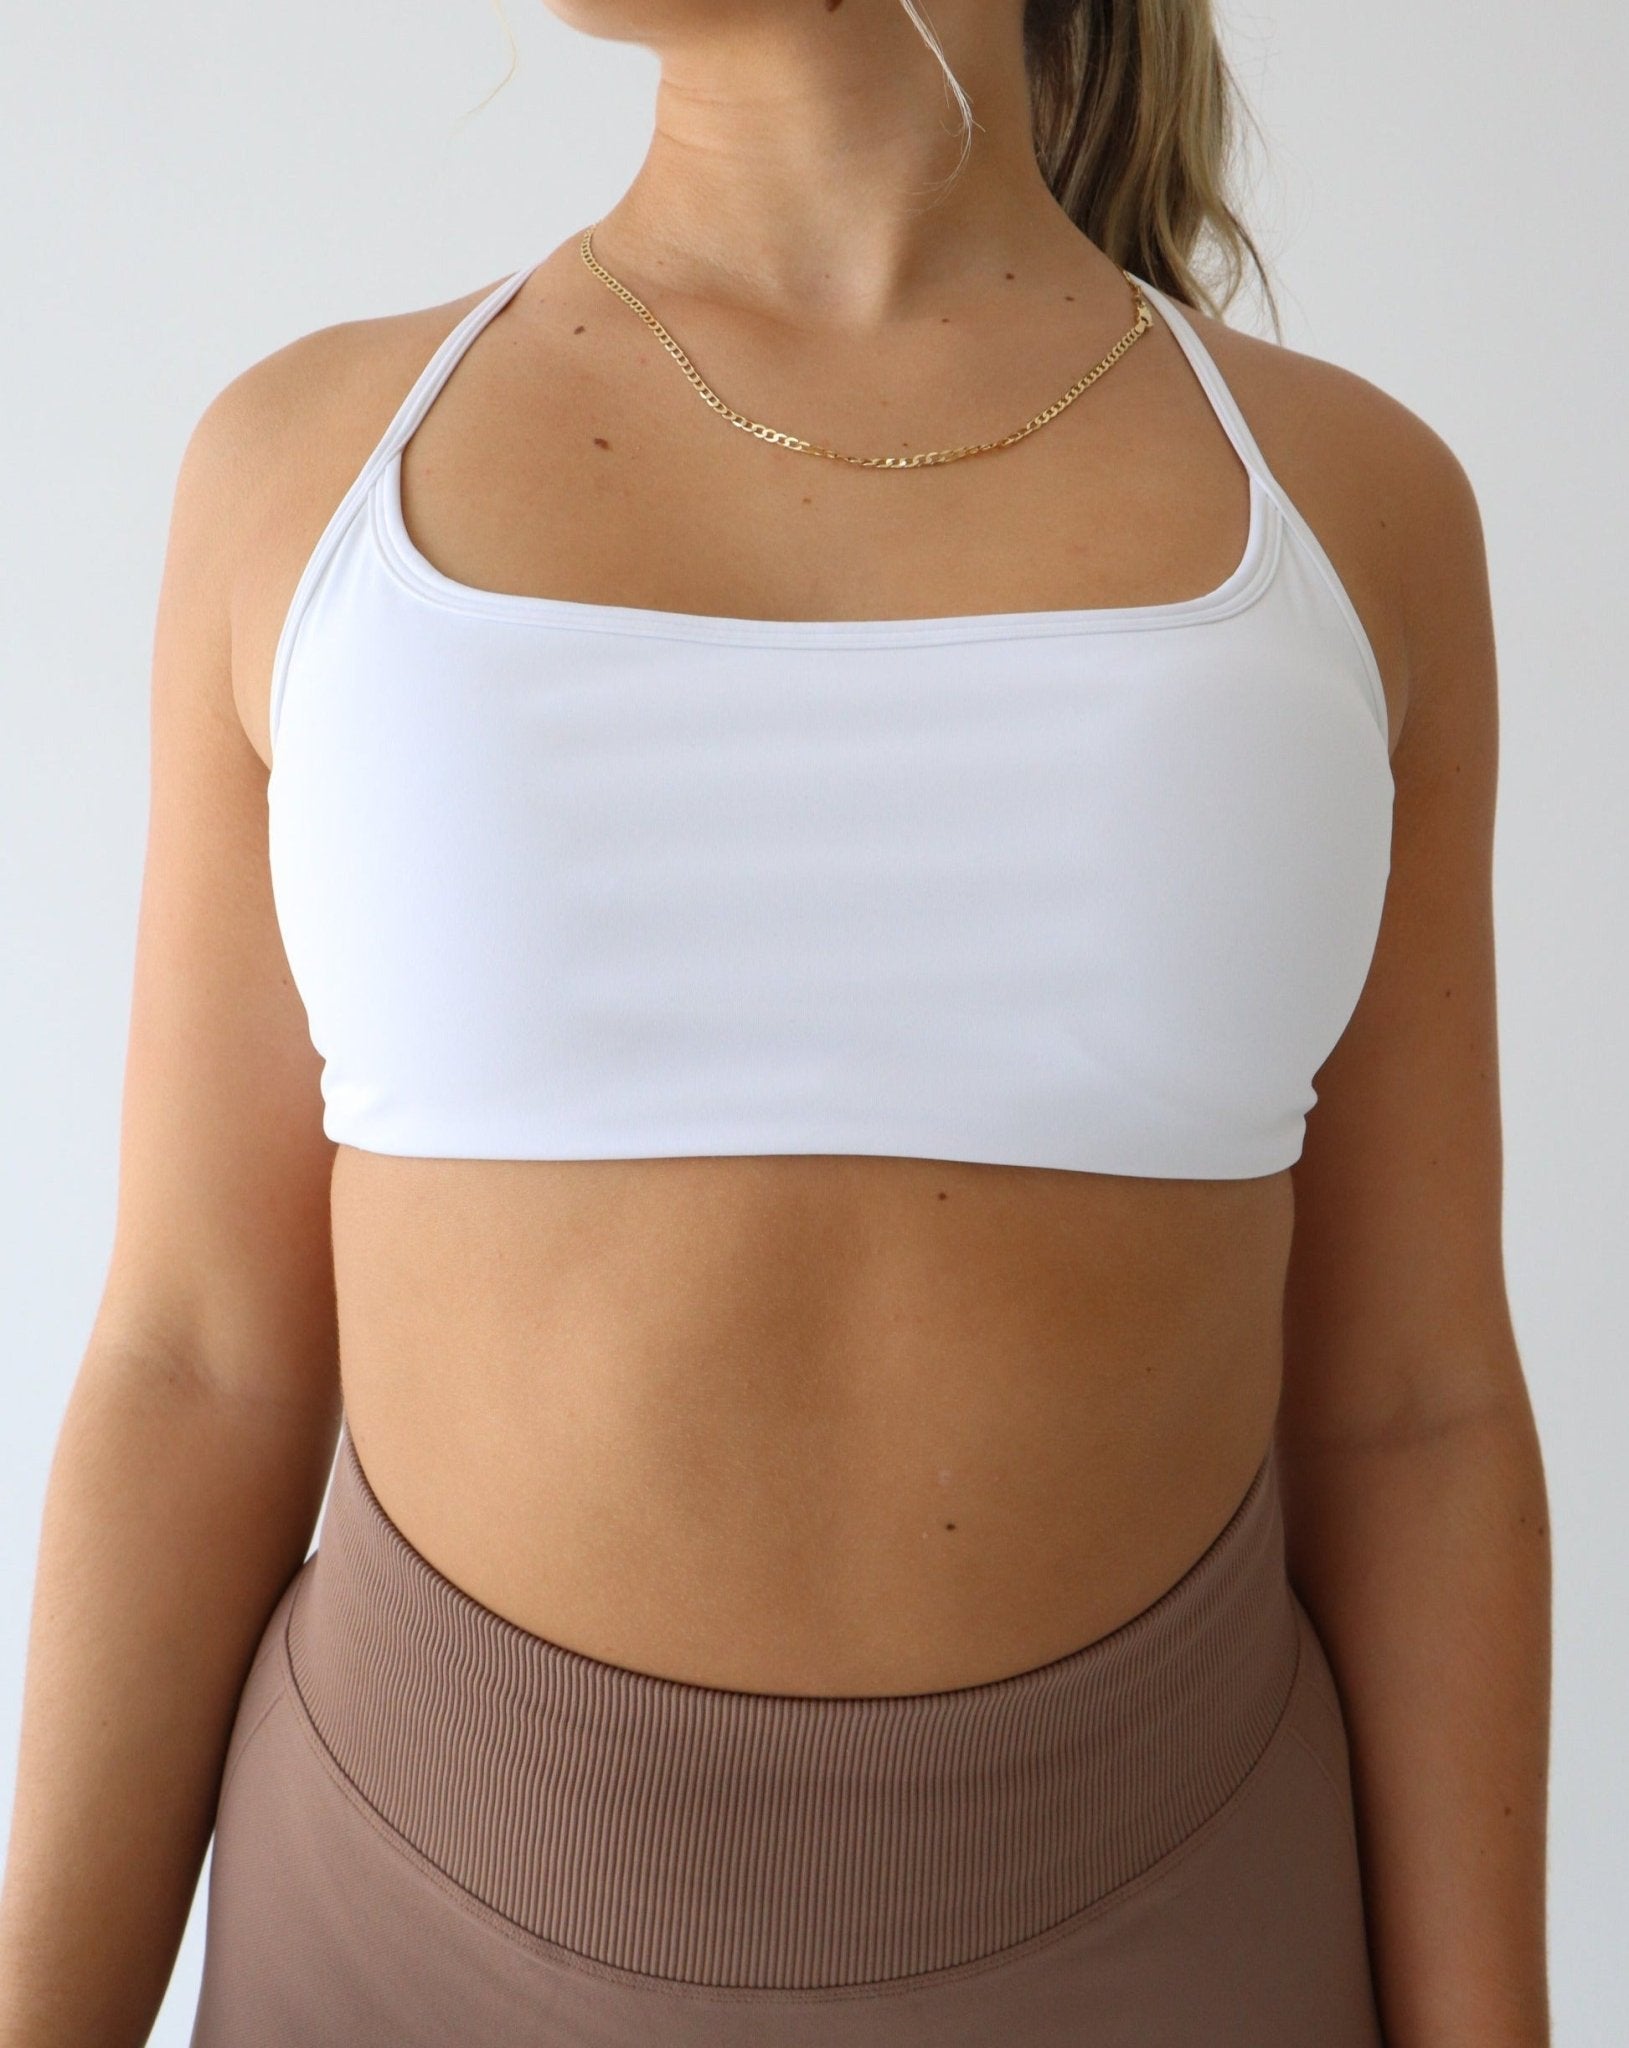 REFINE Sports Bra - WHITE - LIBERA Fitness Apparel. Upgrade your workout attire with our Refine Sports Bra, crafted from double-layered, stretchy fabric for breathability and opacity. Versatile styling options for every gym session.